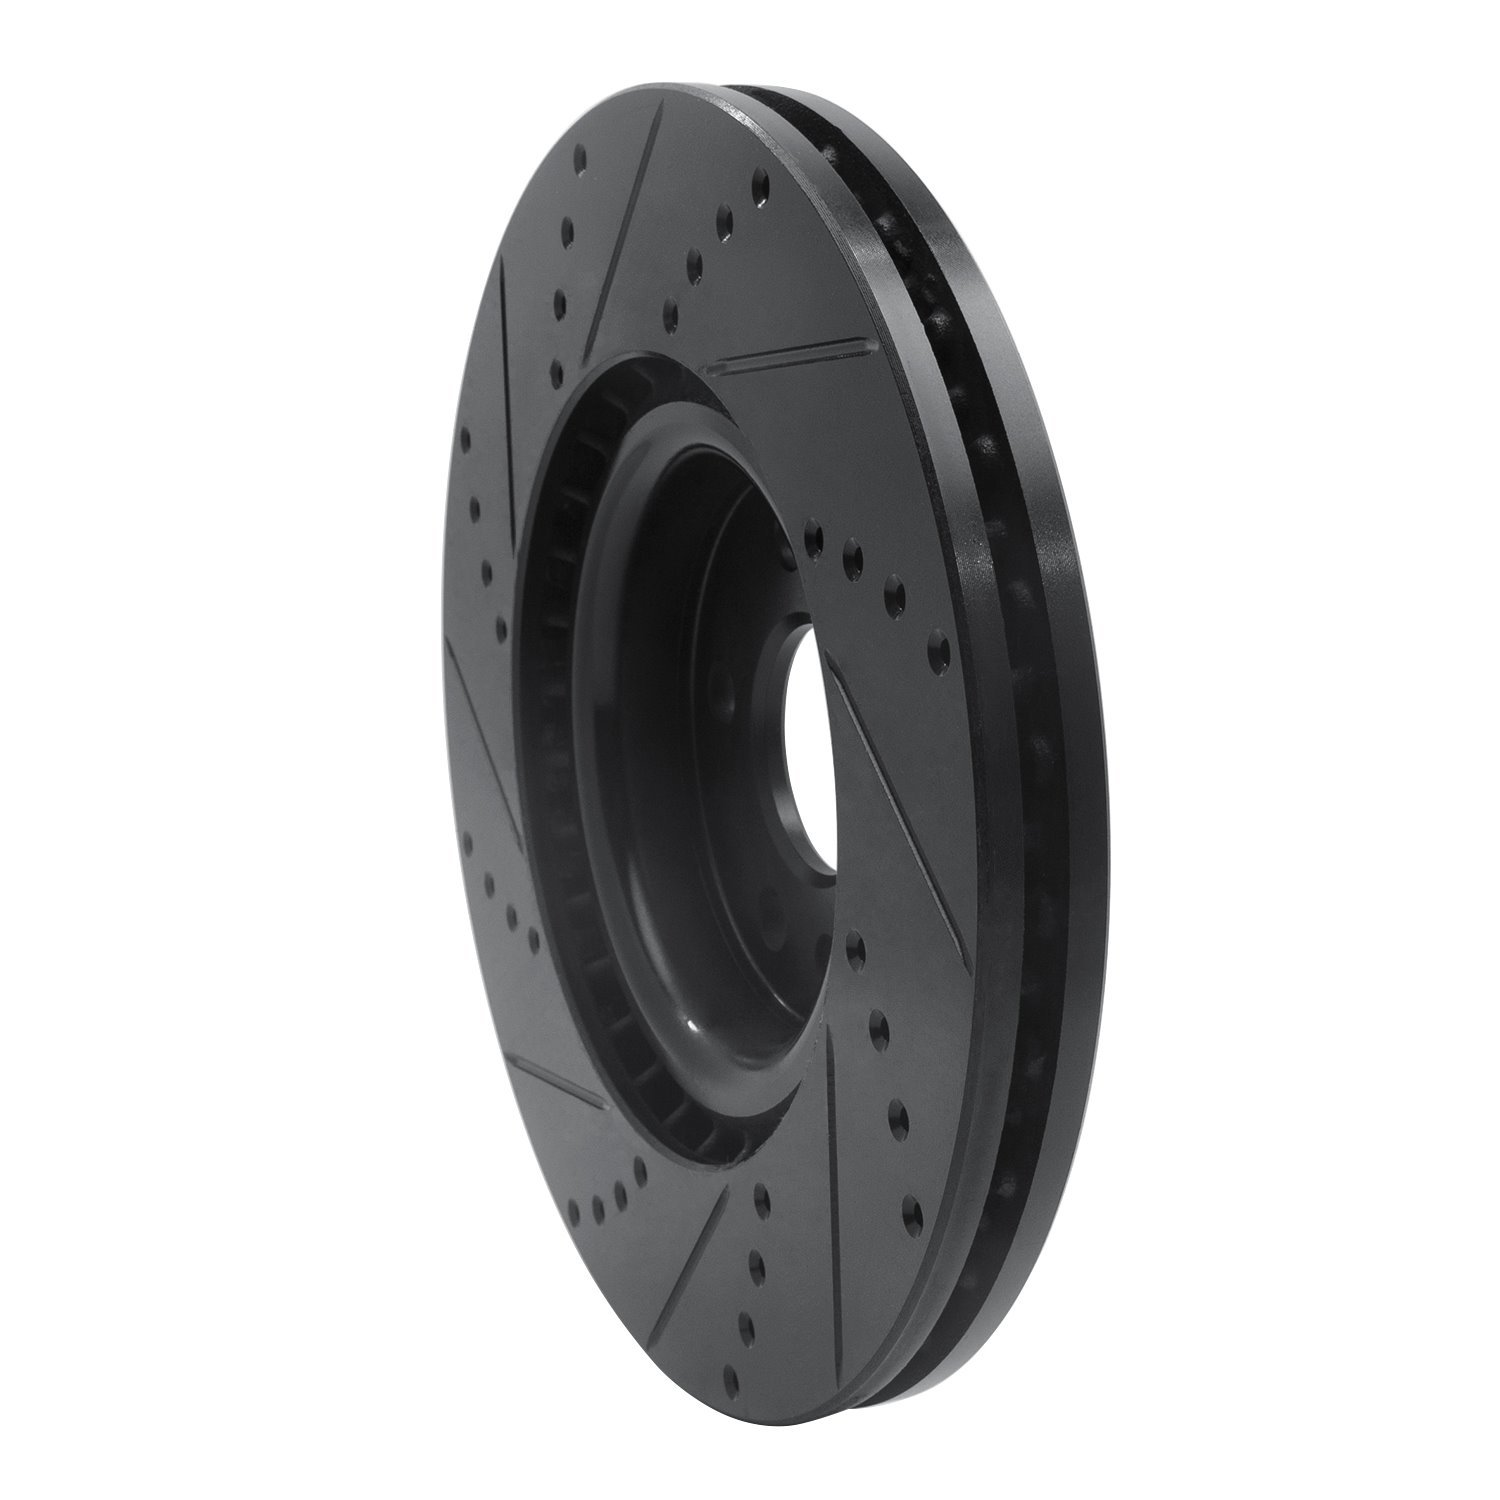 E-Line Drilled & Slotted Black Brake Rotor, 2015-2019 Fits Multiple Makes/Models, Position: Front Right